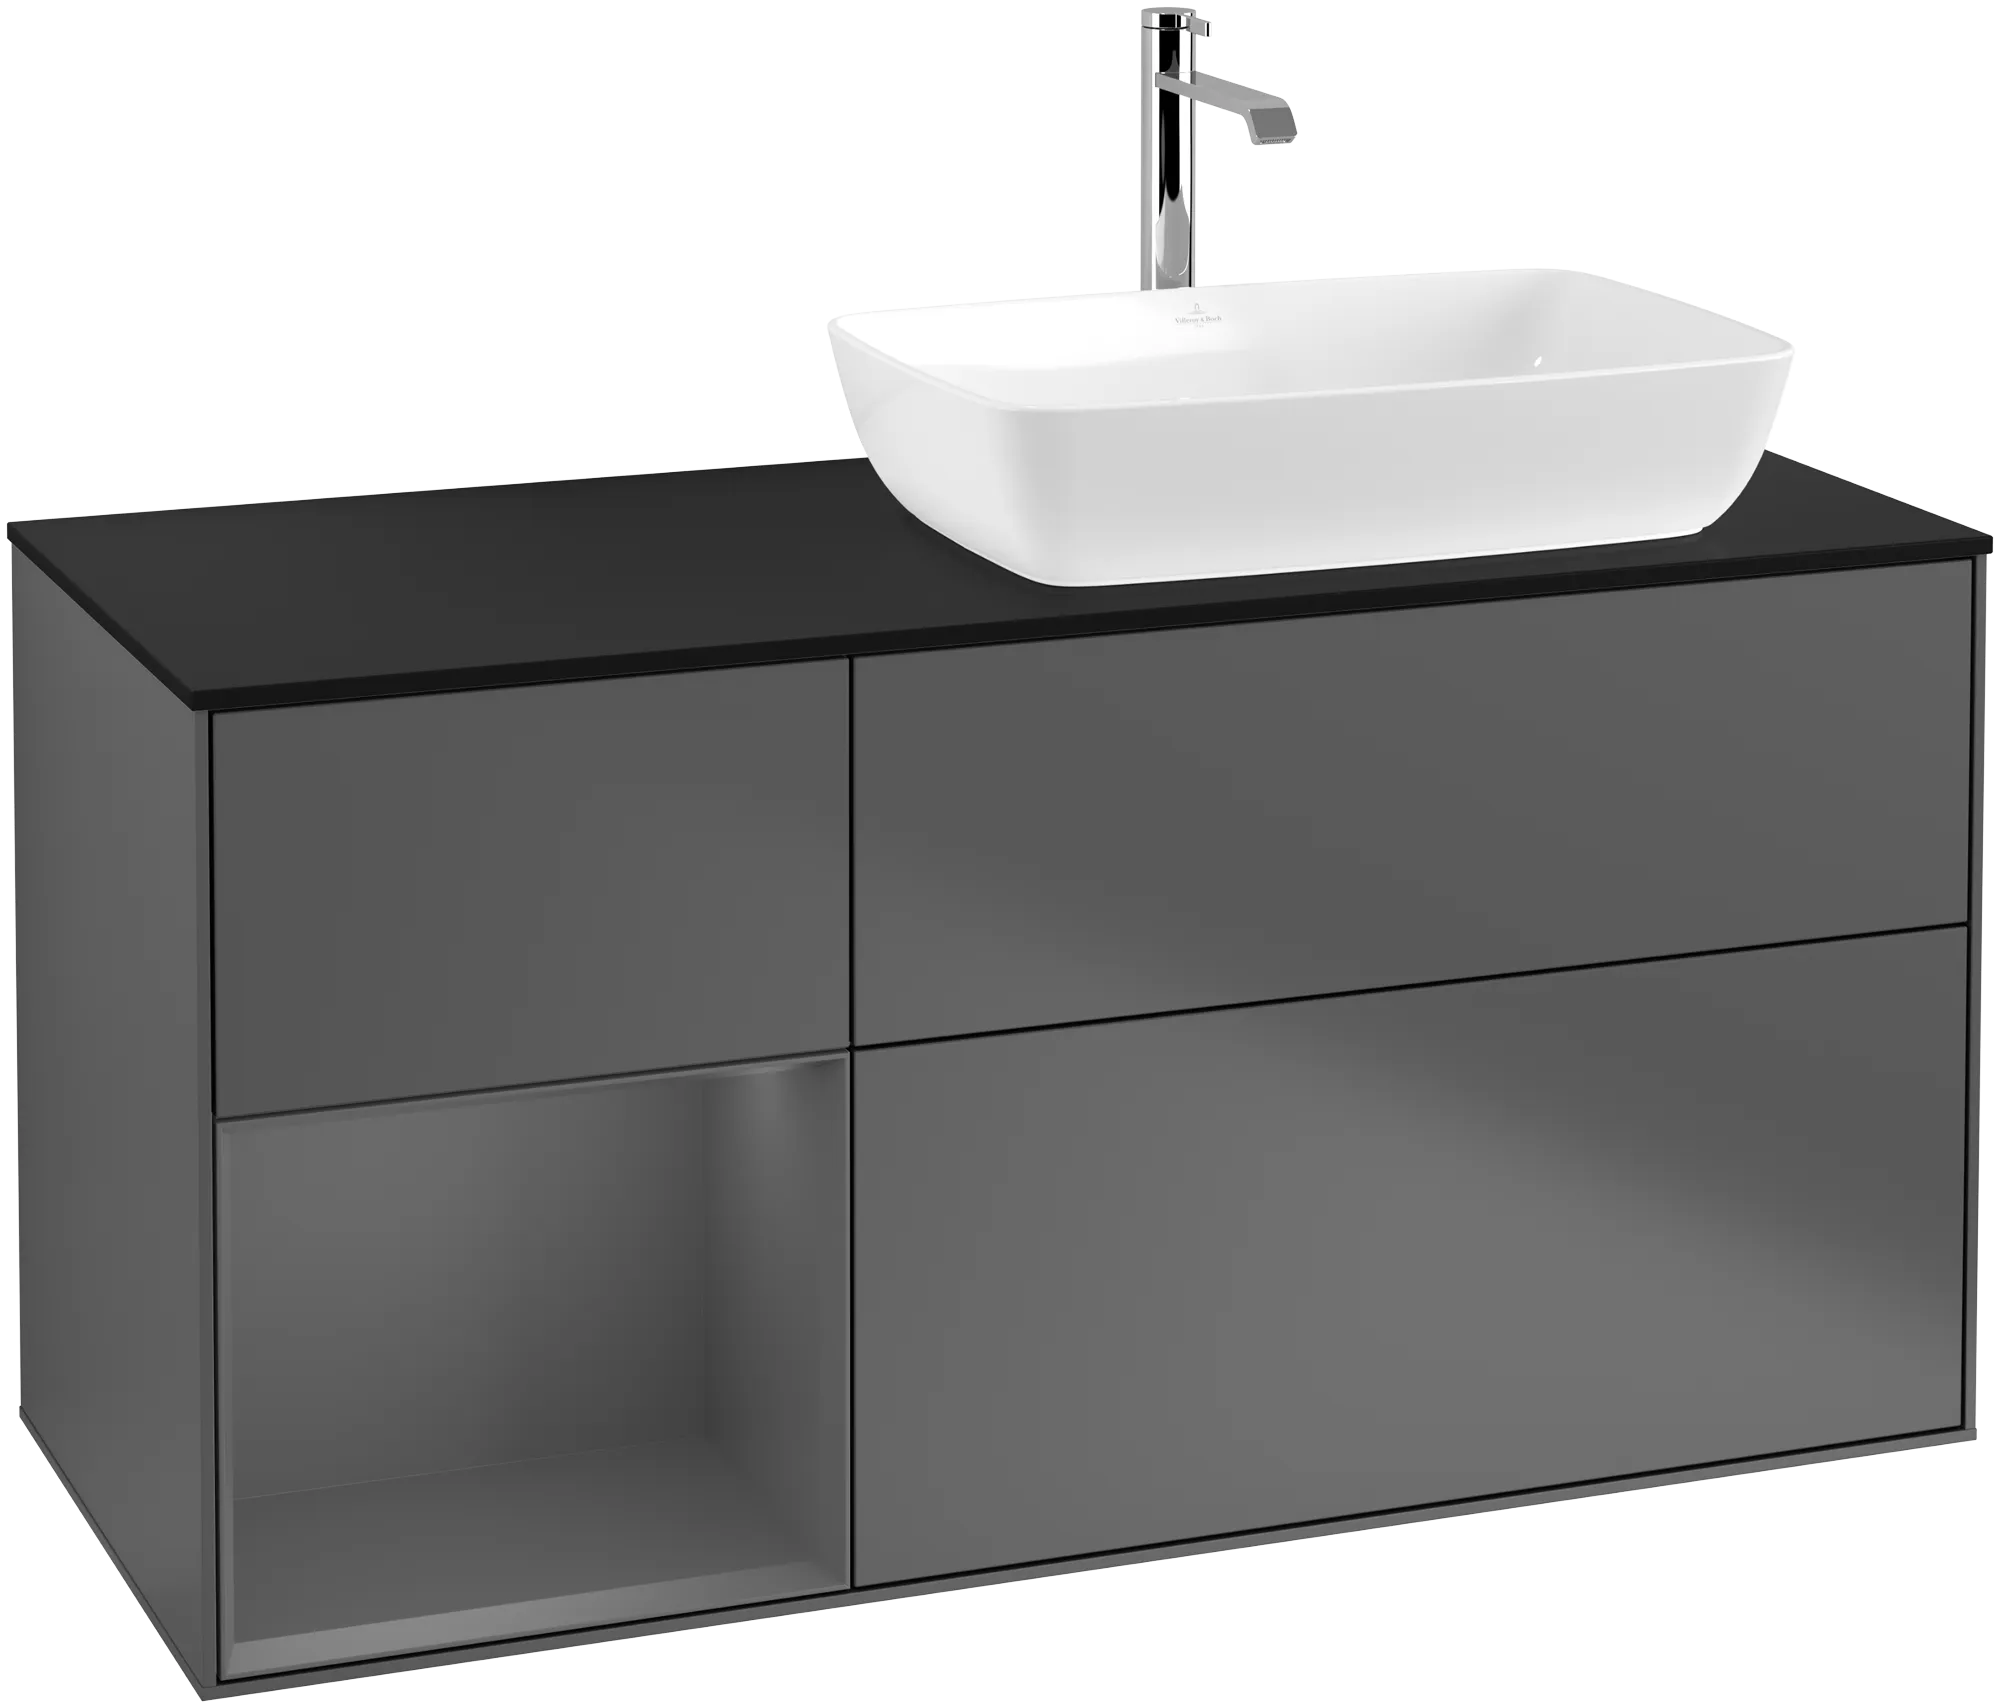 Picture of VILLEROY BOCH Finion Vanity unit, with lighting, 3 pull-out compartments, 1200 x 603 x 501 mm, Anthracite Matt Lacquer / Anthracite Matt Lacquer / Glass Black Matt #G802GKGK